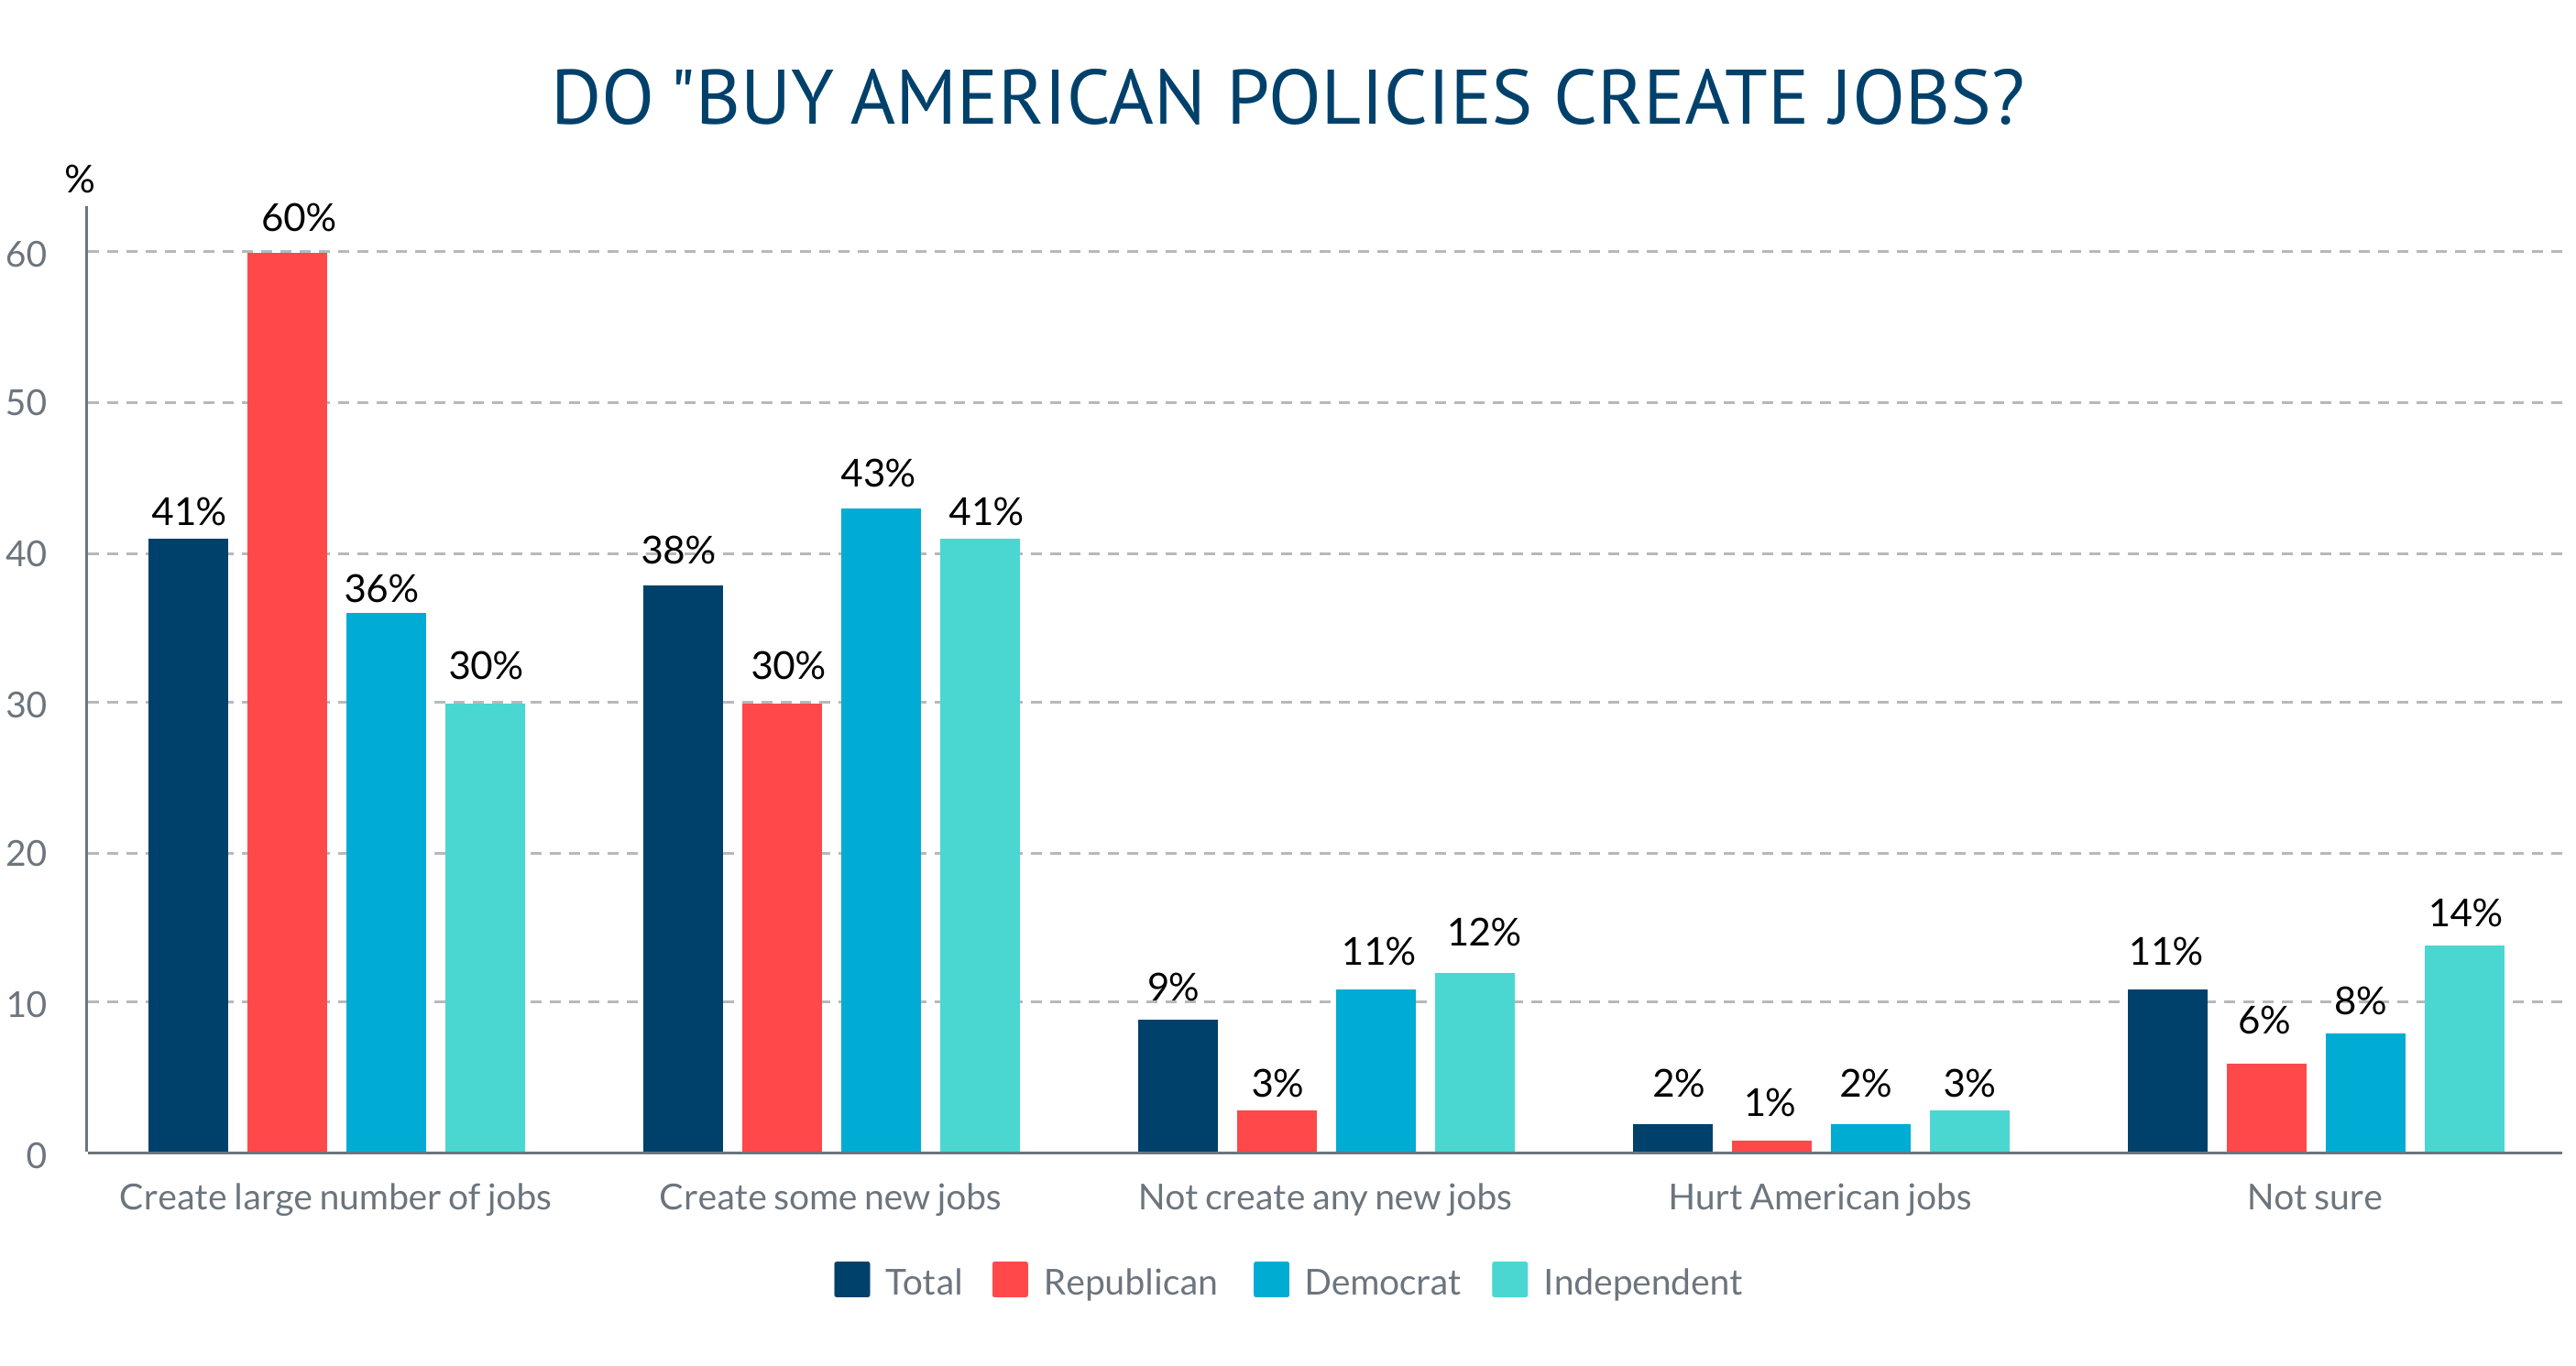 Q2 Do Buy American policies create jobs numbers corrected